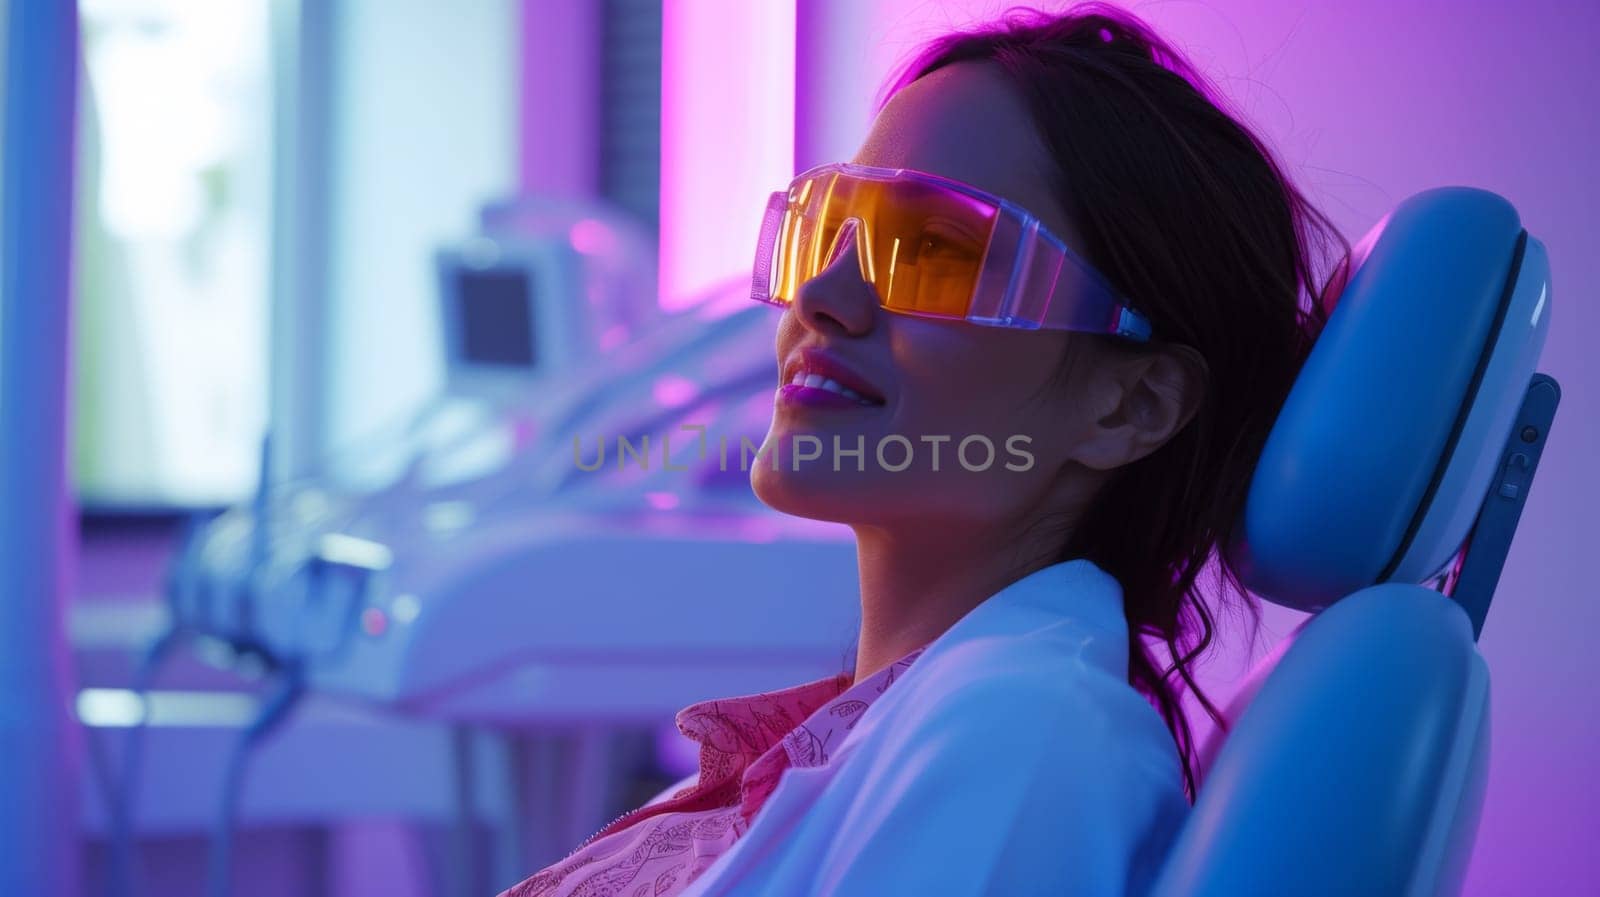 A woman in a chair with goggles on smiling